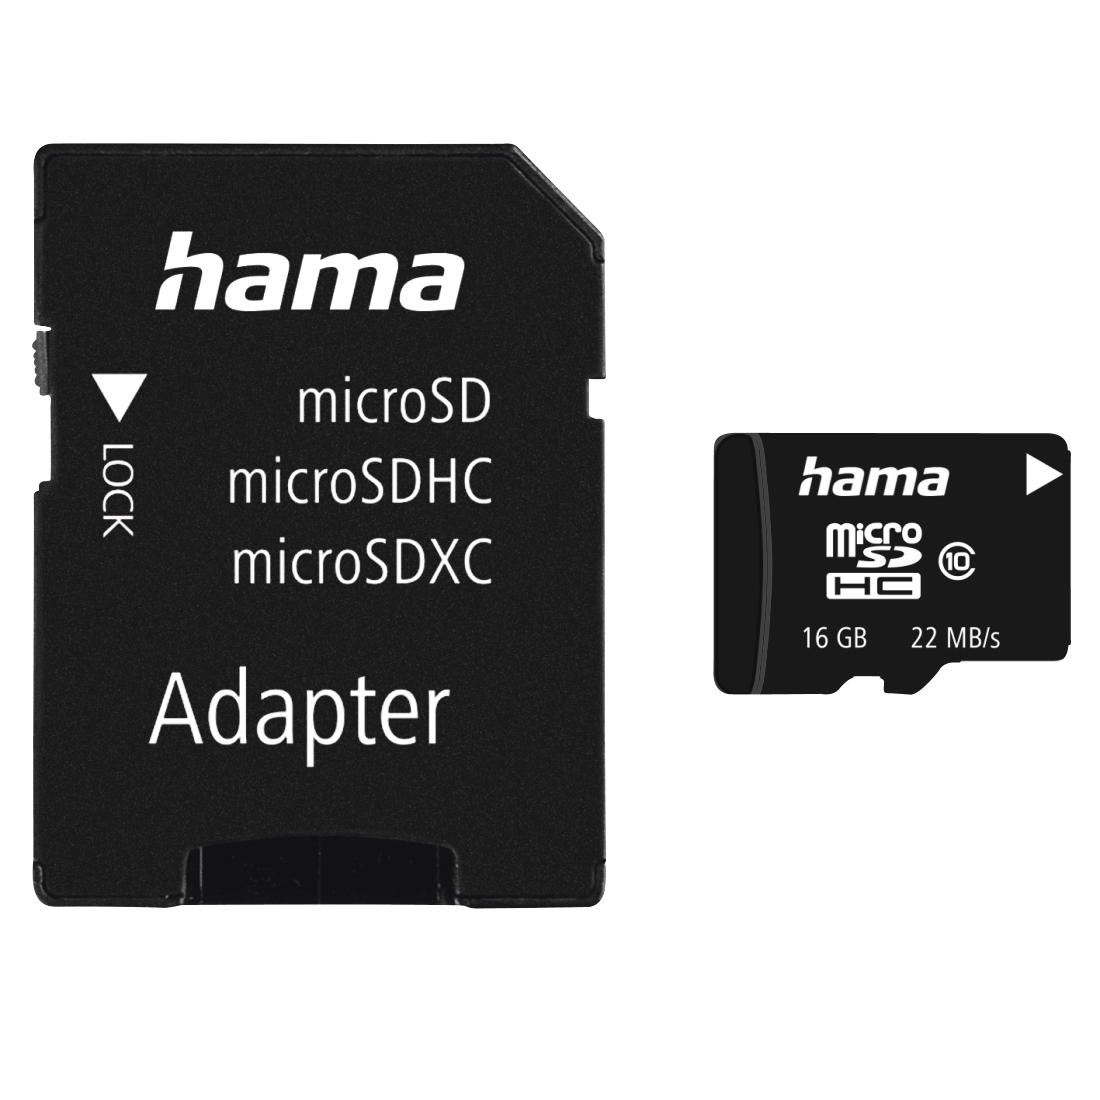 stainless calcium manager Hama microSDHC 16GB Class 10 22 MB/s + Adapter/Photo